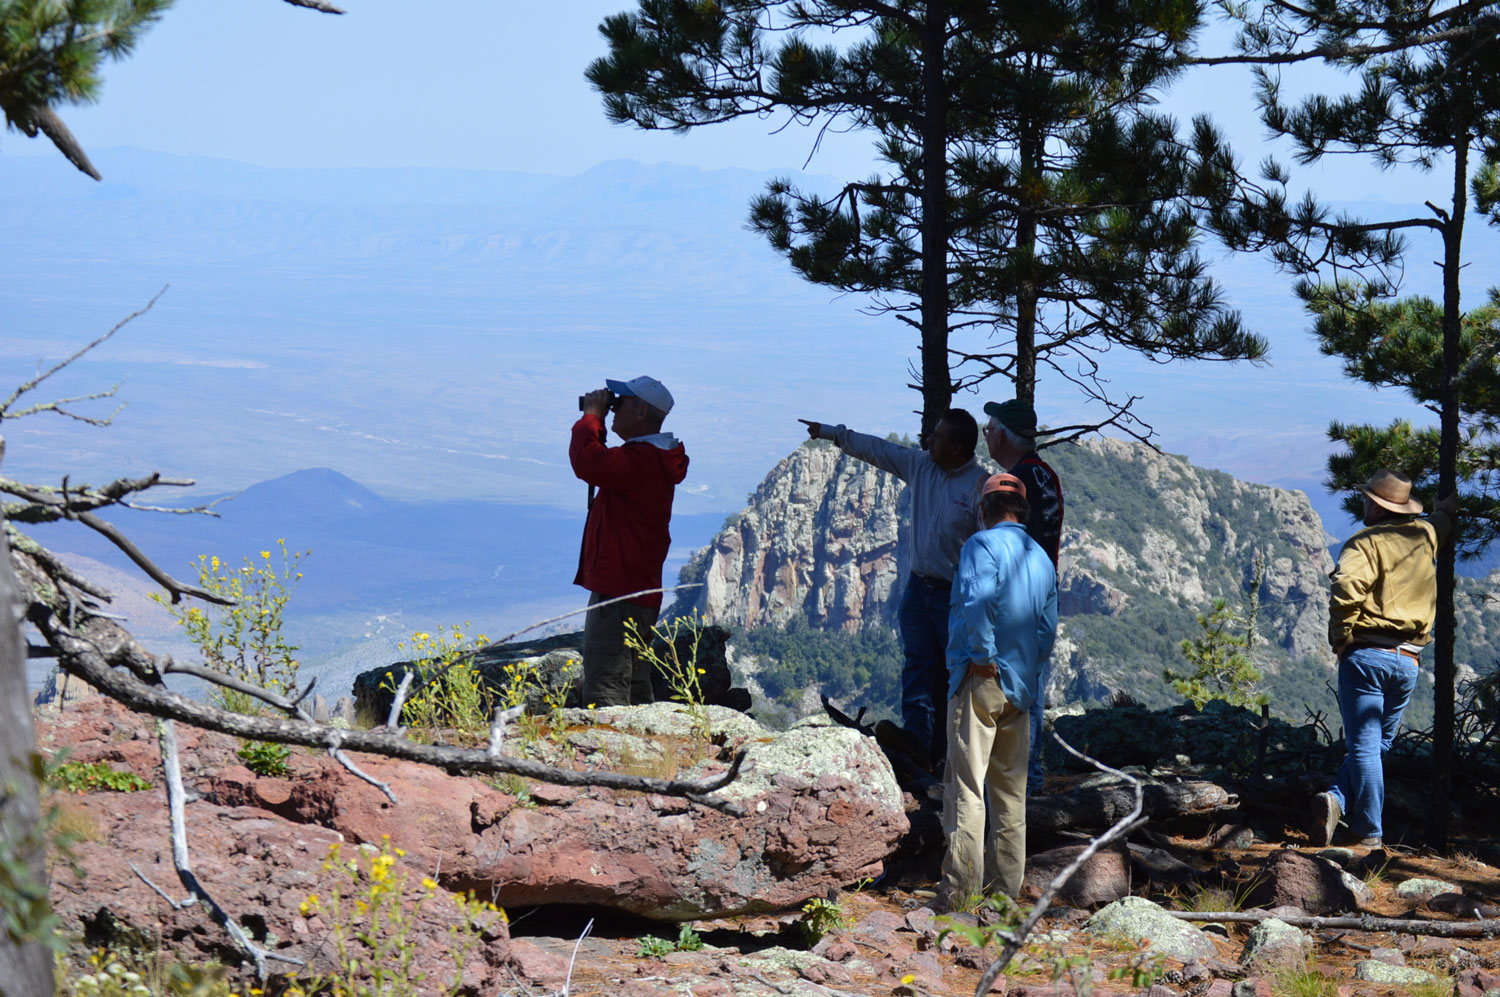 Guests and guides standing on high overlook on Mesa Bonita at 8,600 feet elevation